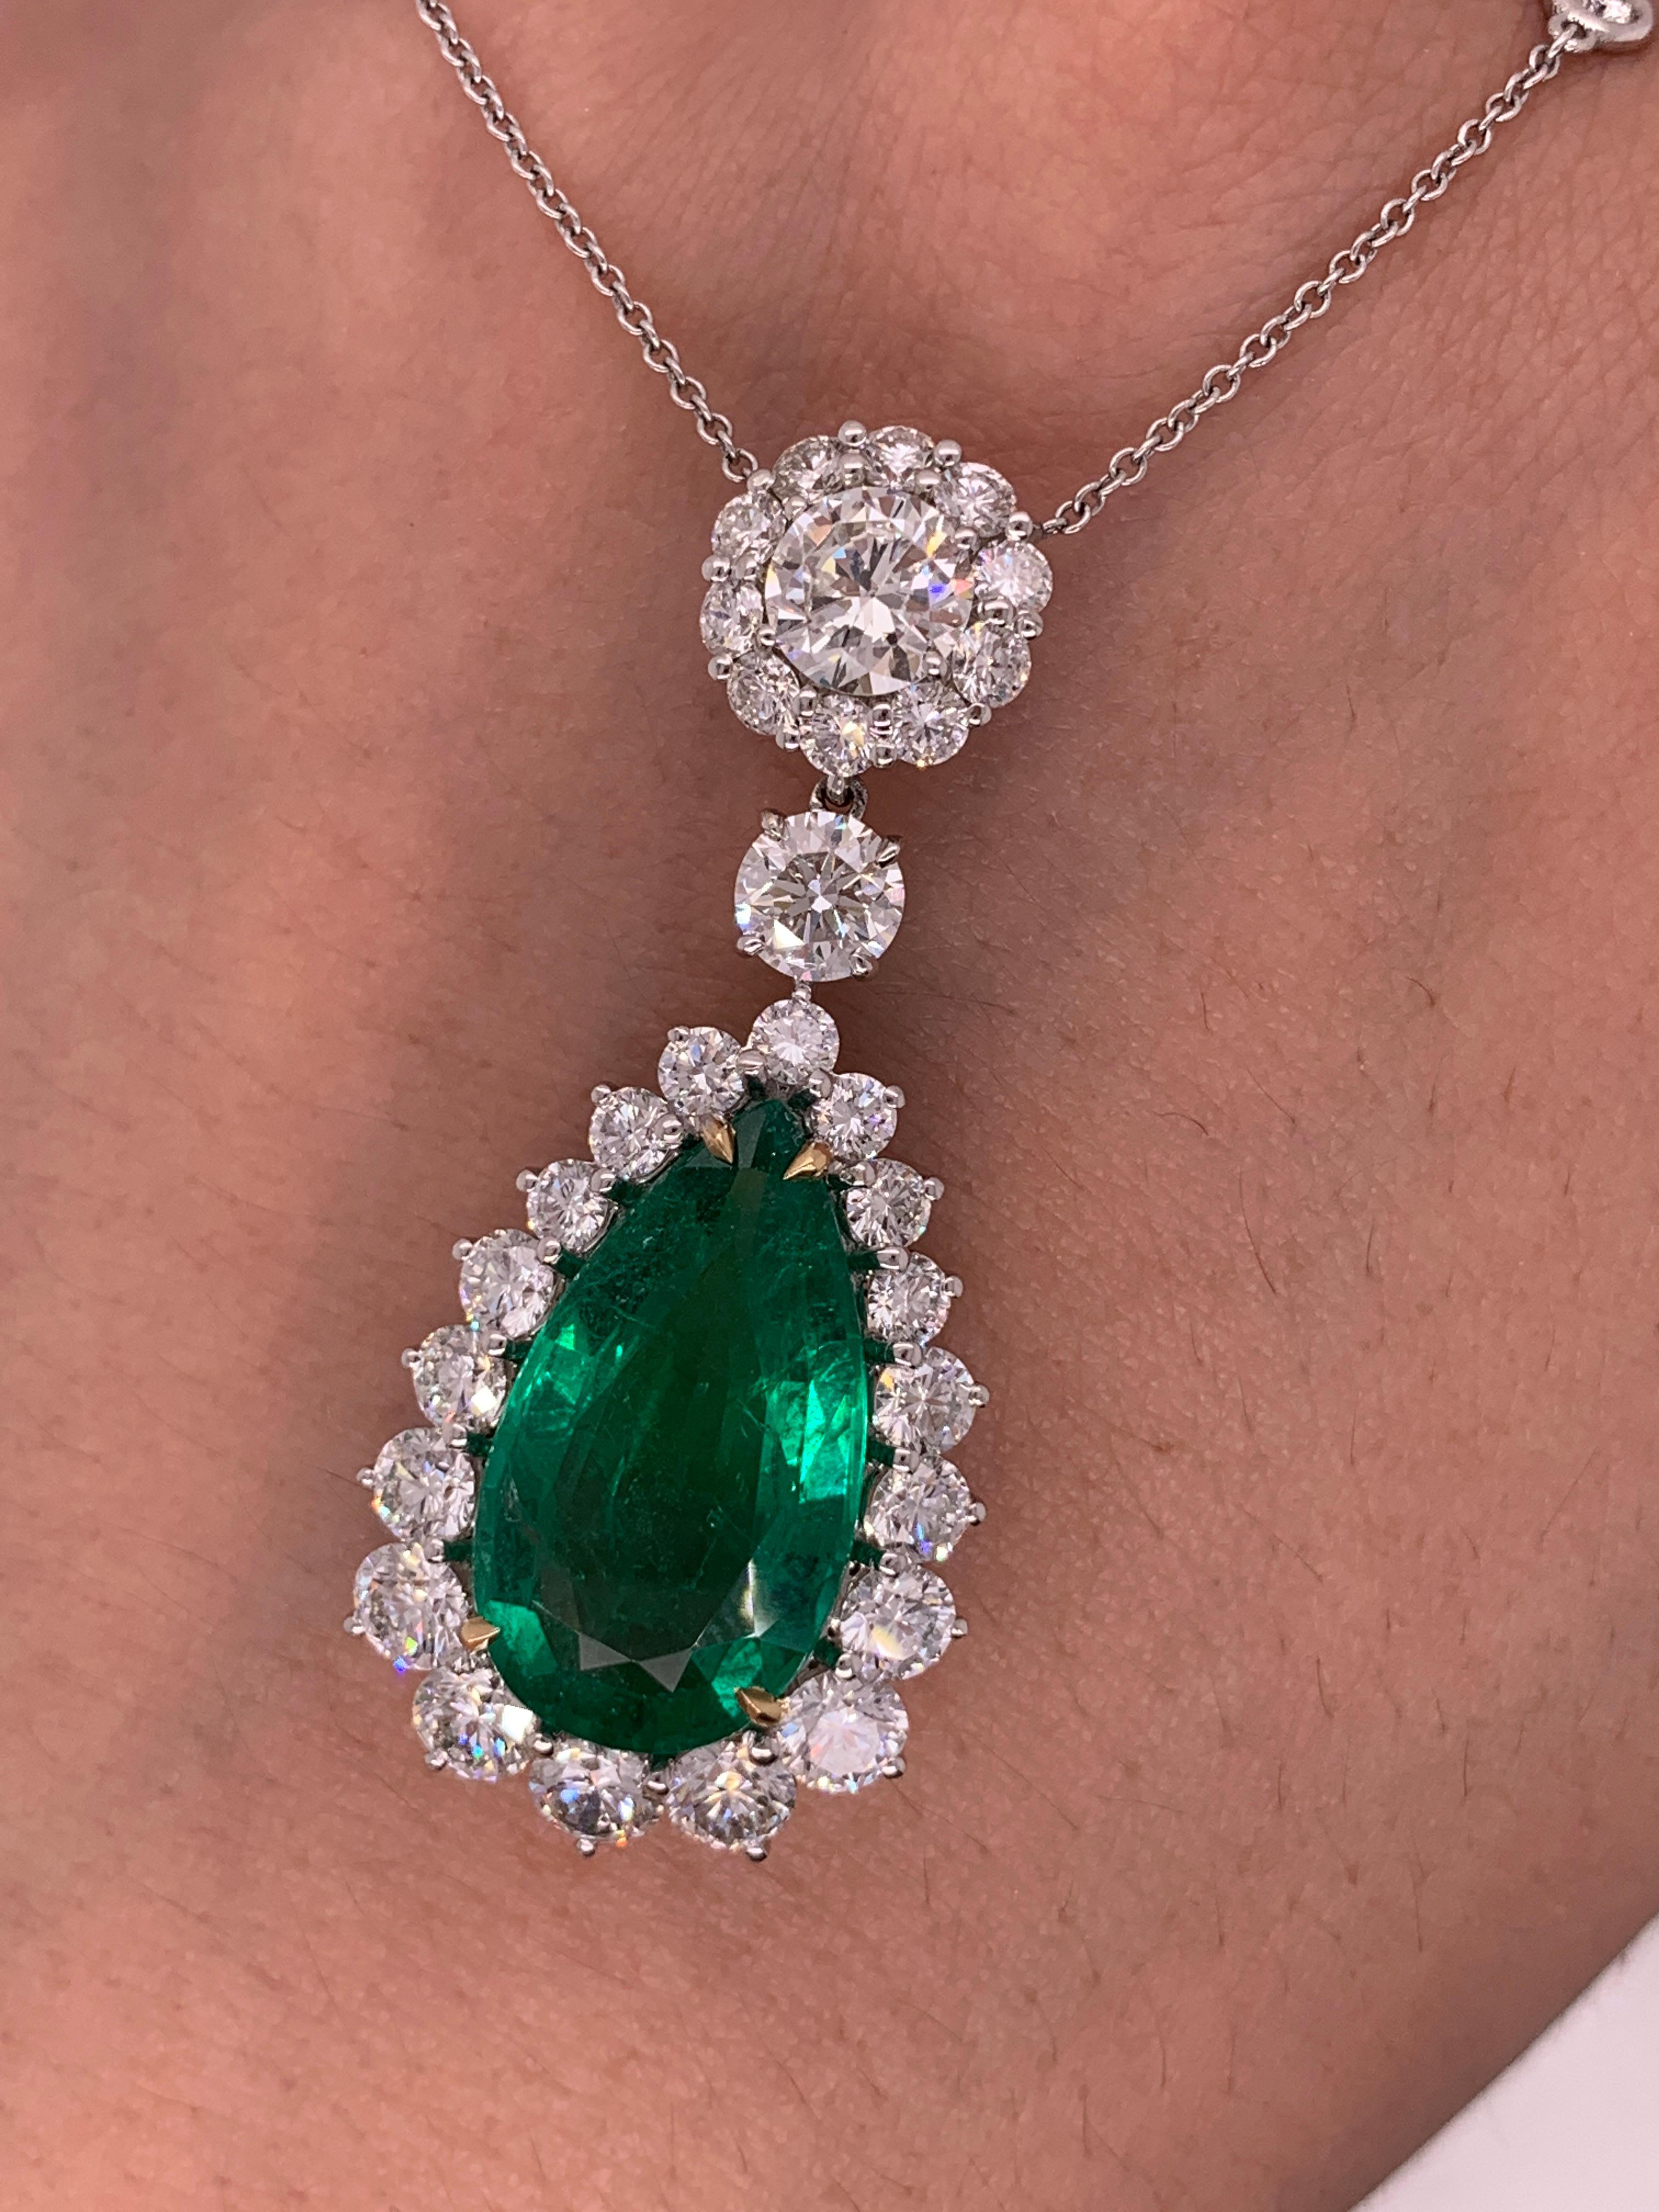 Elegant Pear Shape Green Emerald and Diamond Pendant

The center stone is 8.58 Carats Zambian Pear Shaped Emerald, certified by Swiss Lab.

Surrounded by 5.10 Carats of round brilliant cut diamonds, on diamond by the yard necklace

